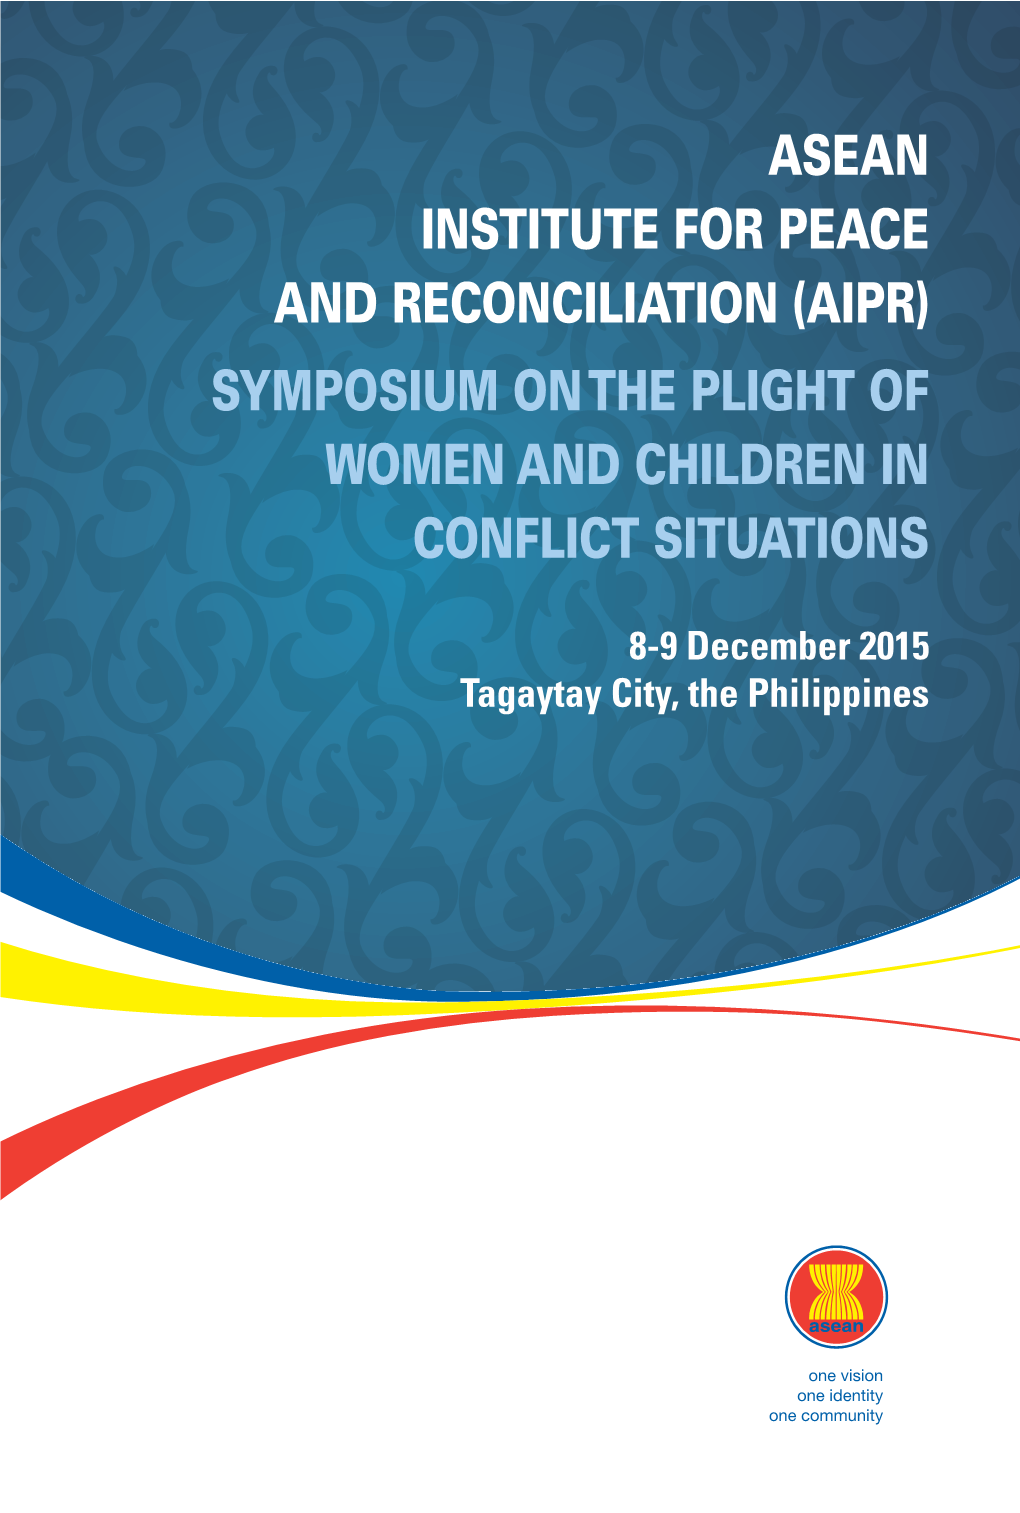 (Aipr) Symposium on the Plight of Women and Children in Conflict Situations